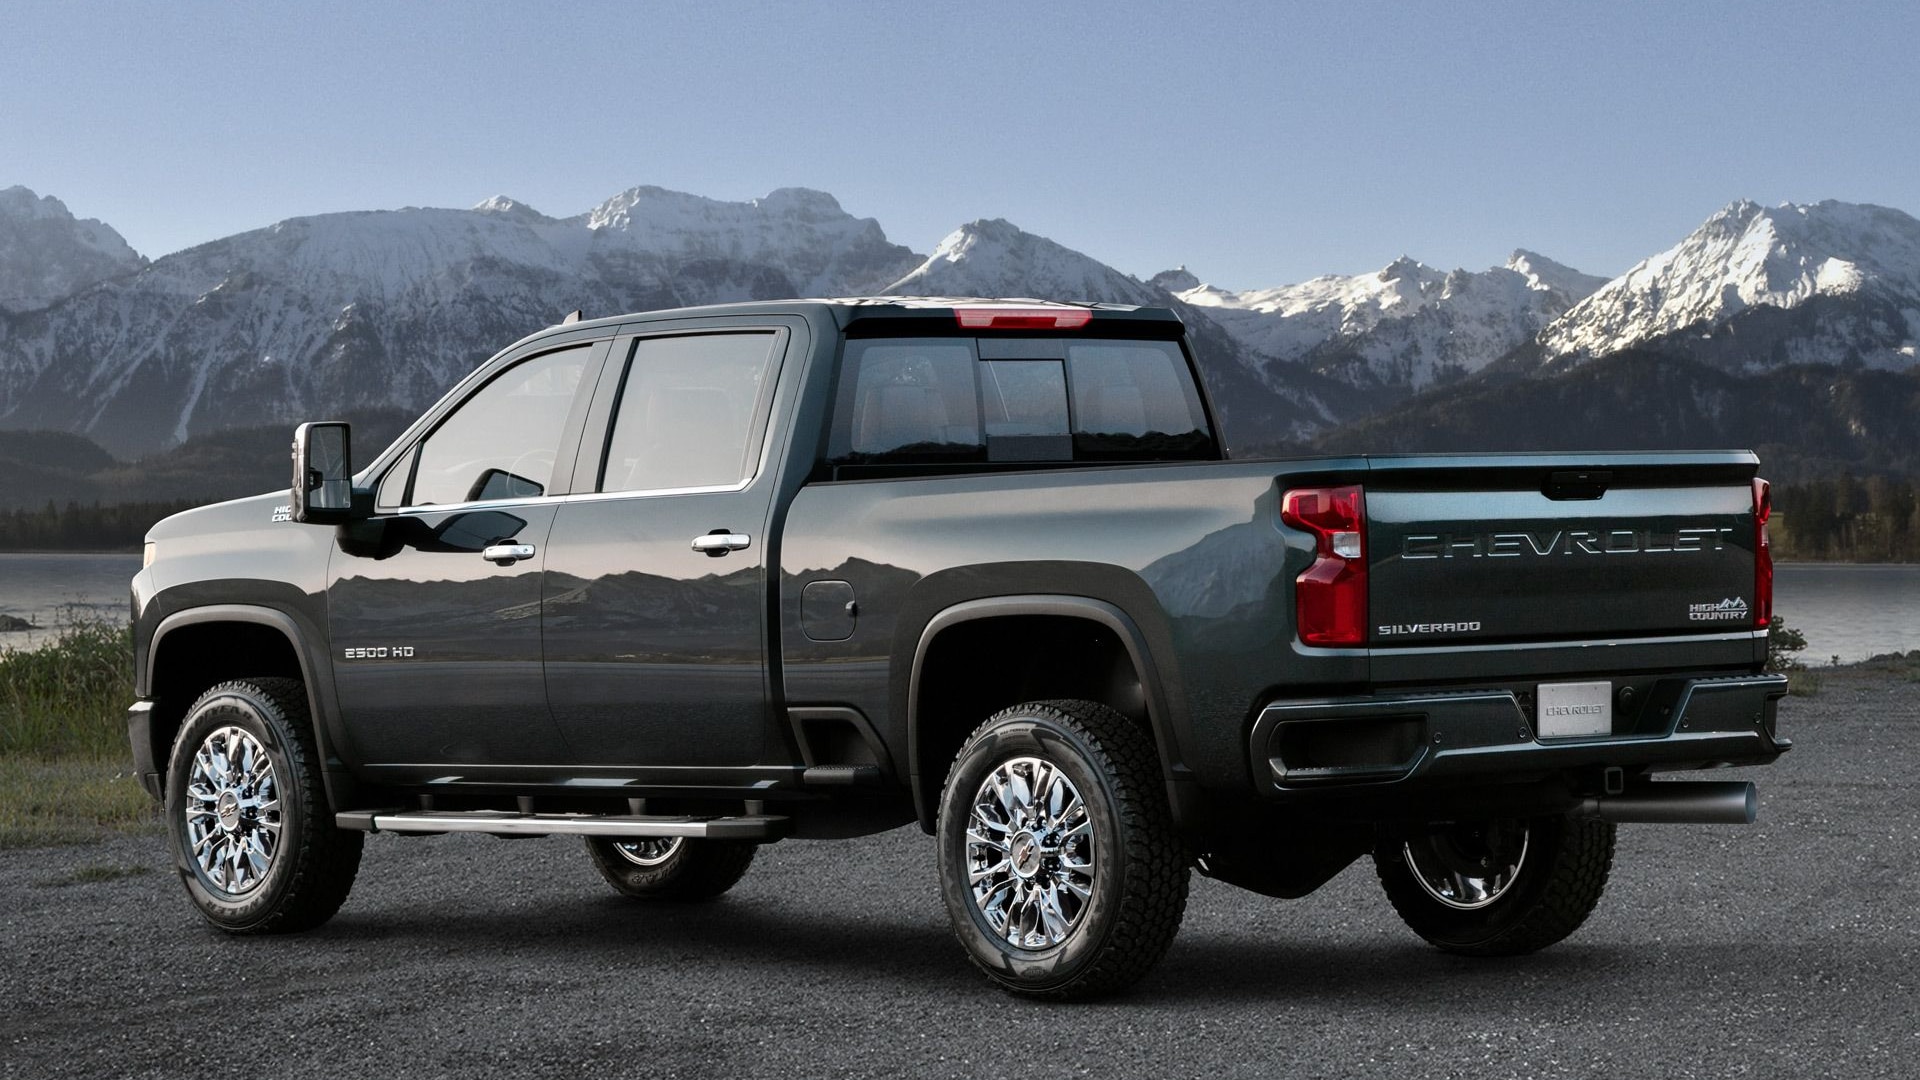 2020 Chevy Silverado 2500HD High Country: More bling, less butch